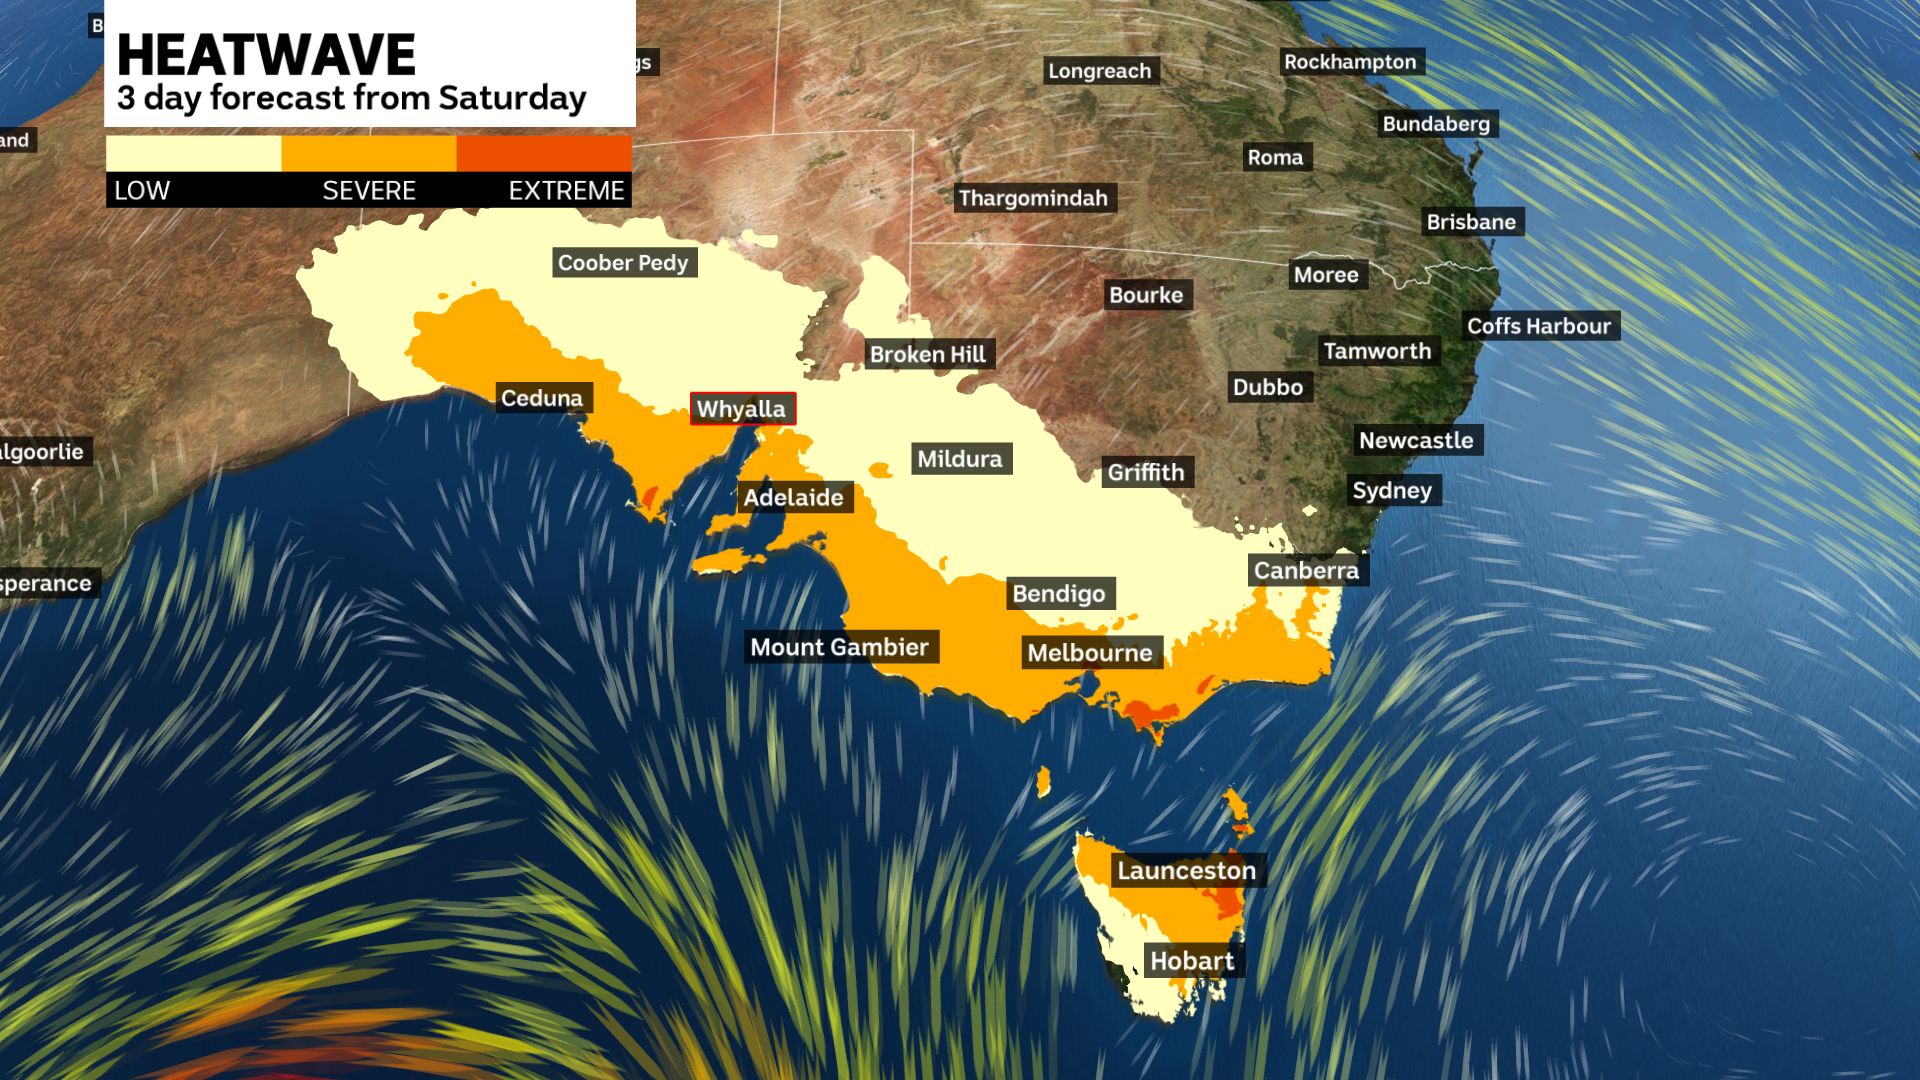 weather map showing Severe heatwave thresholds are being met across parts of southern Australia from Saturday to Monday